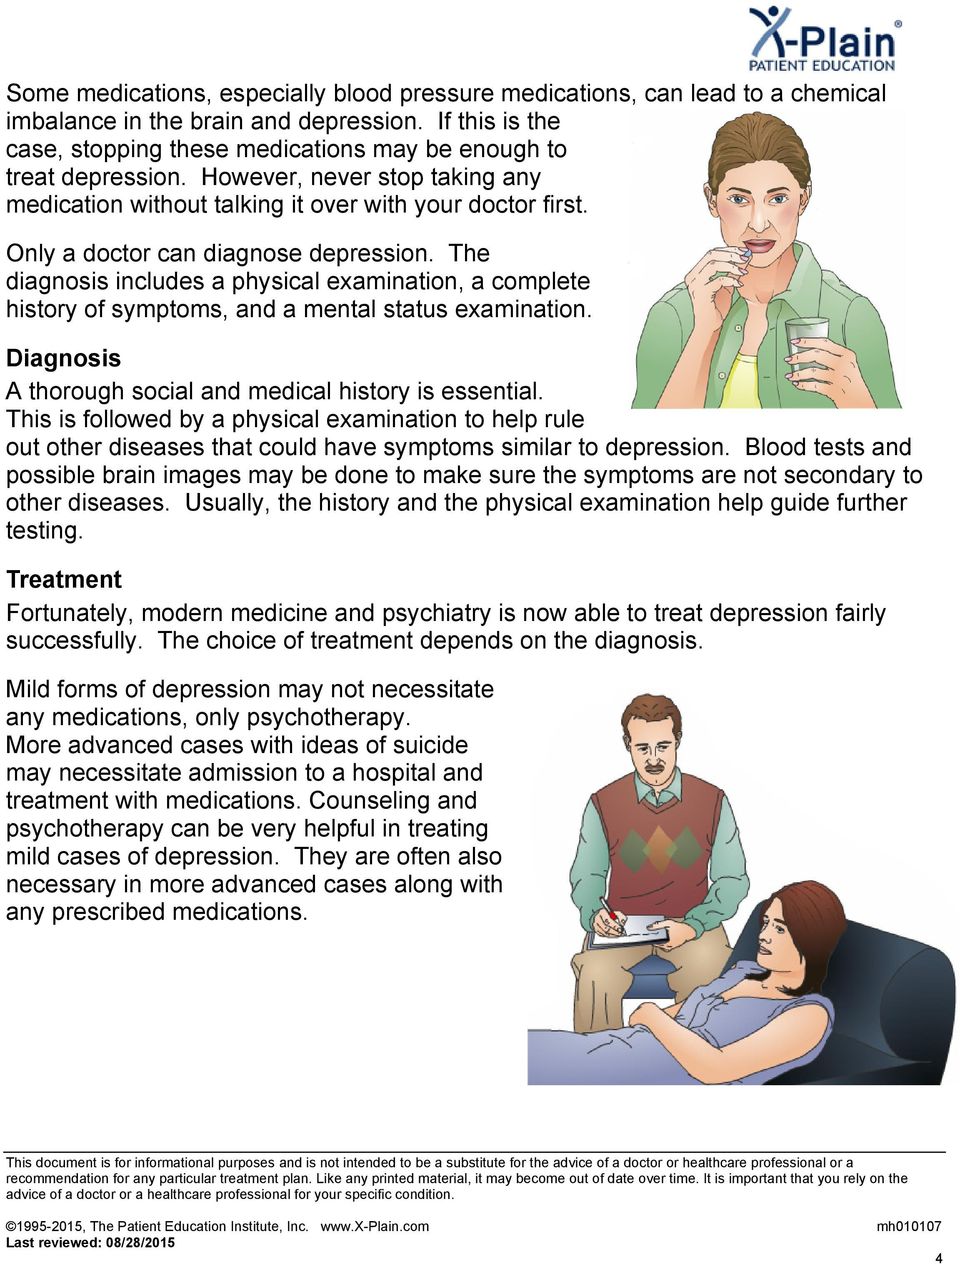 Only a doctor can diagnose depression. The diagnosis includes a physical examination, a complete history of symptoms, and a mental status examination.